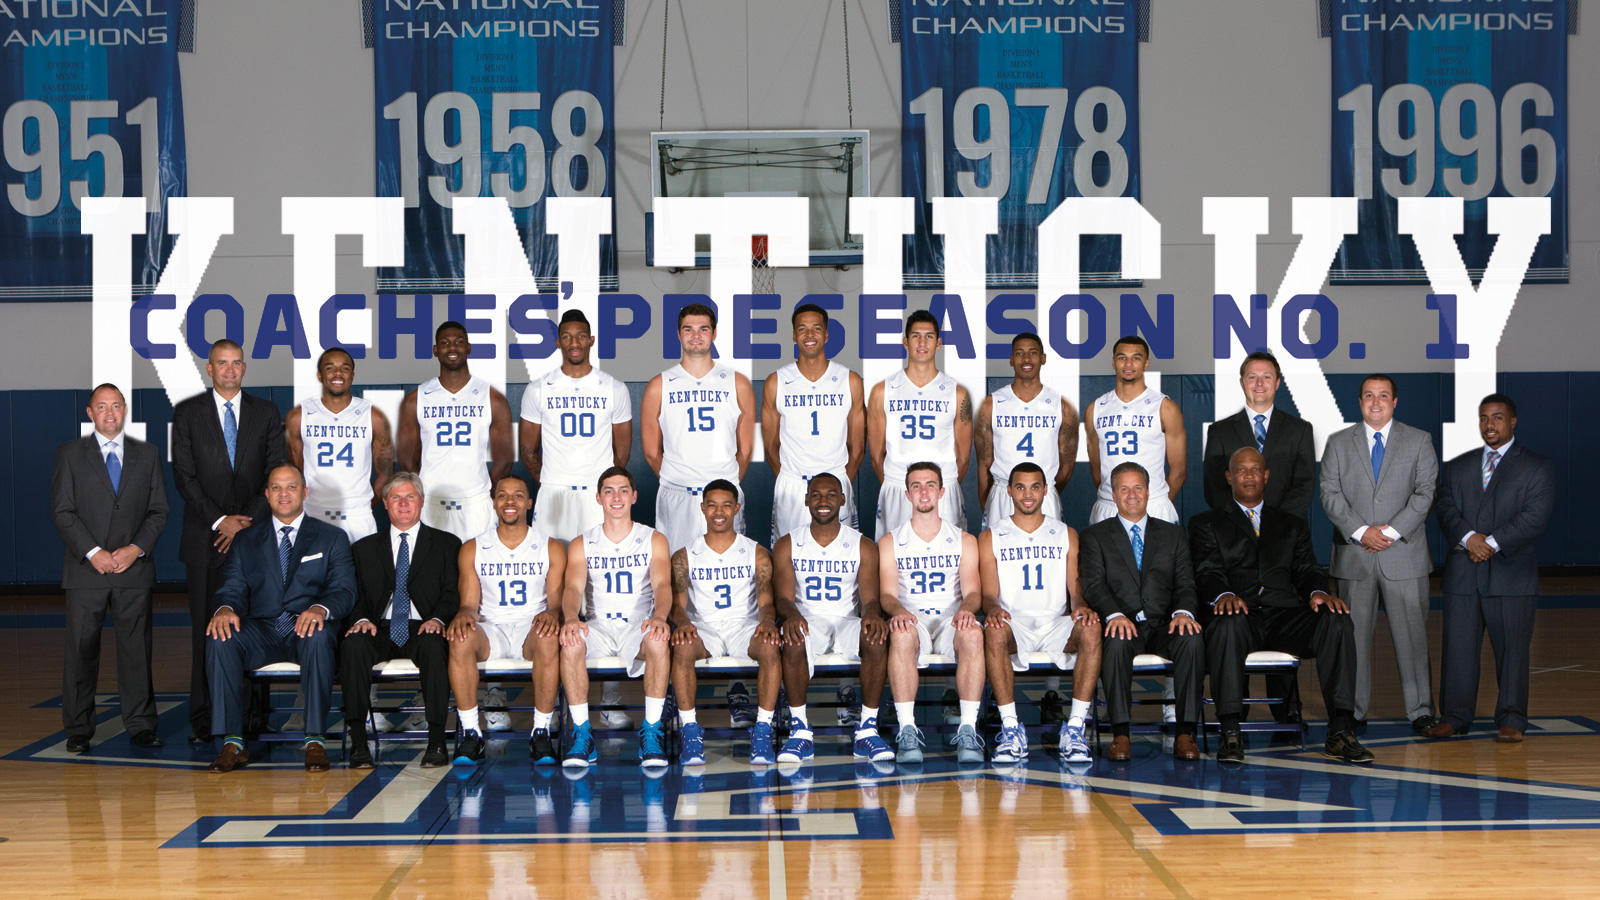 UK Ranked No. 1 in Coaches’ Poll for Third Straight Season